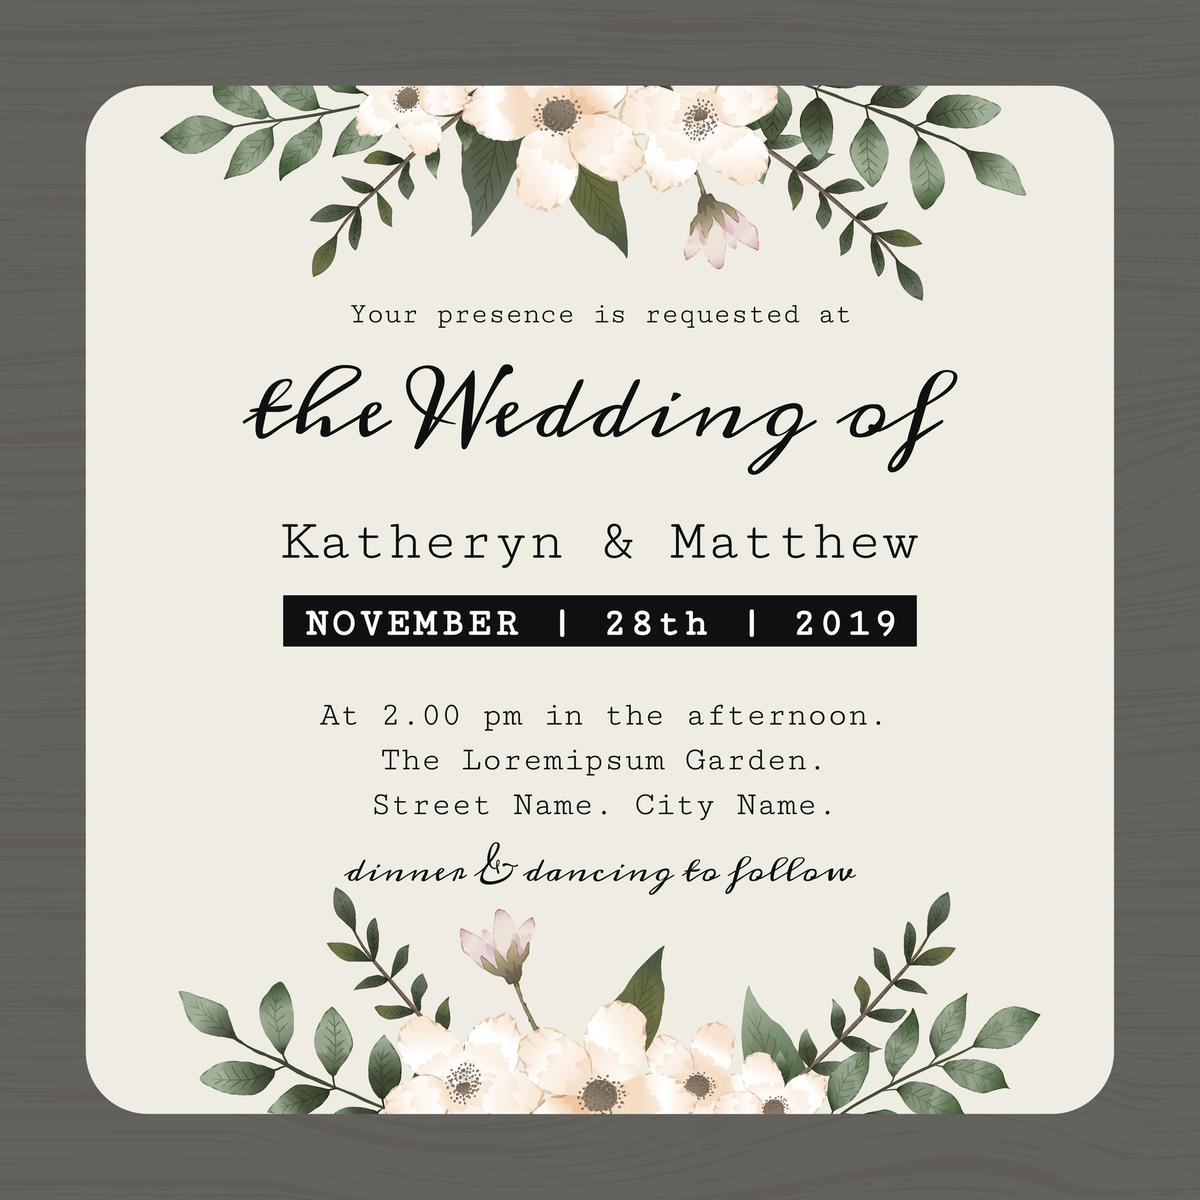 How to Write a Wedding Announcement? It